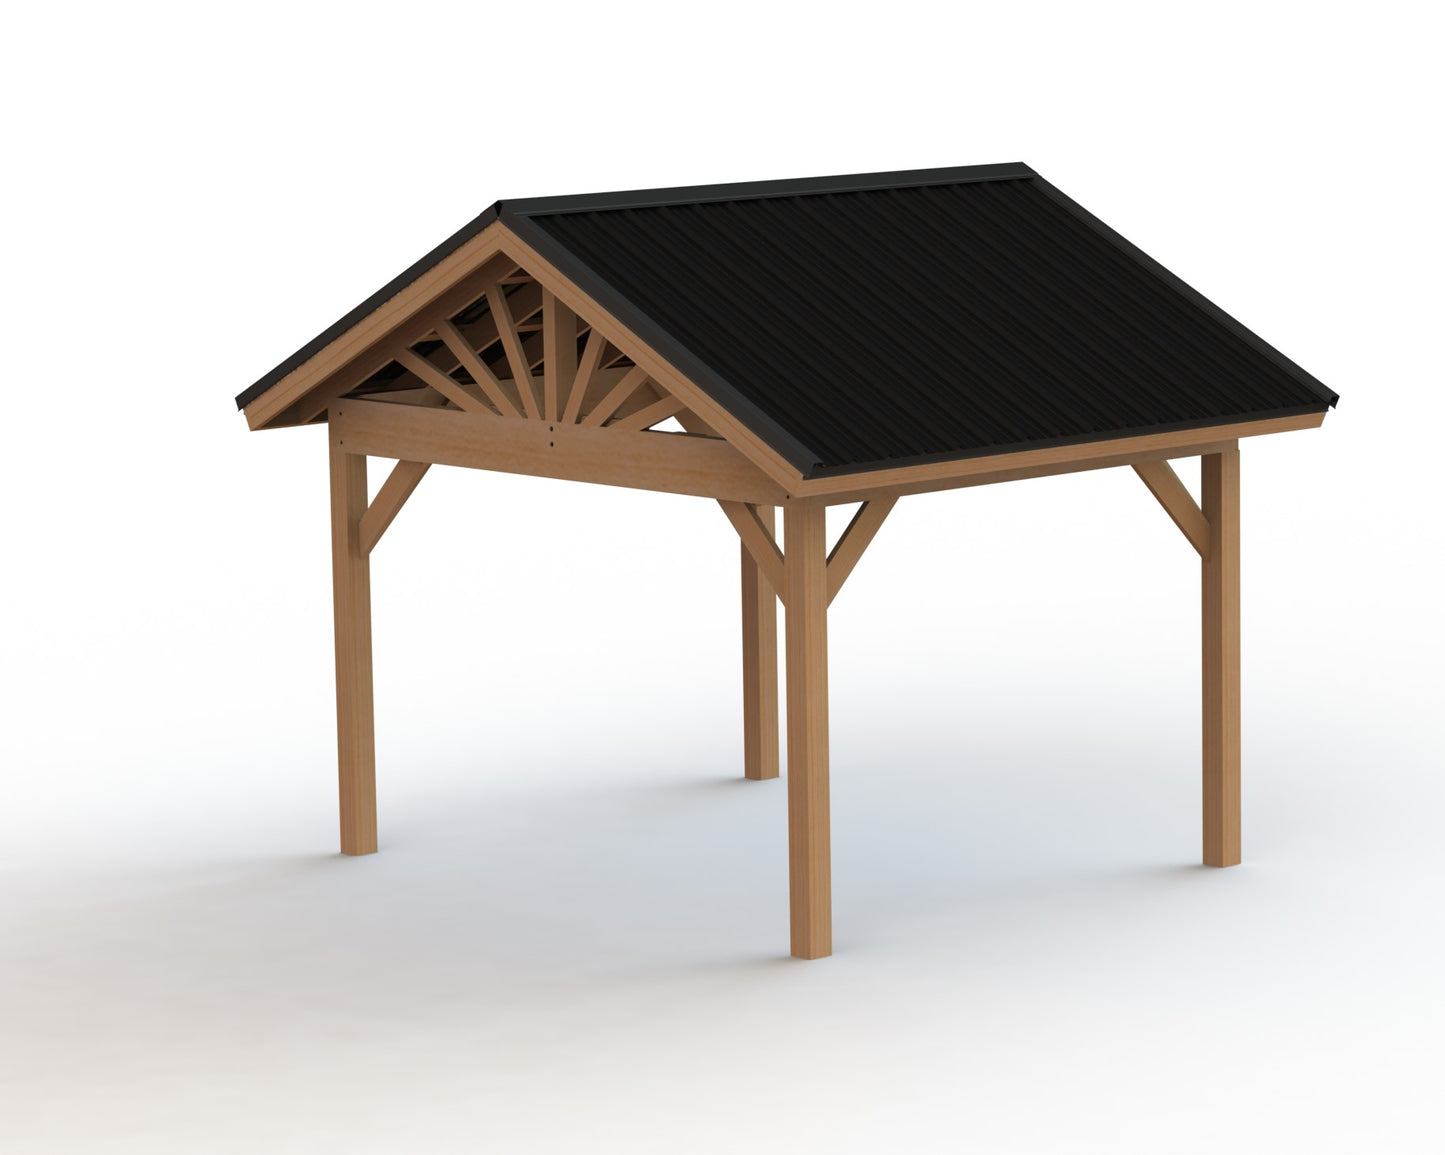 Gazebo Building Plans | Gable Metal Roof - Perfect for Hot Tubs 12'x10'